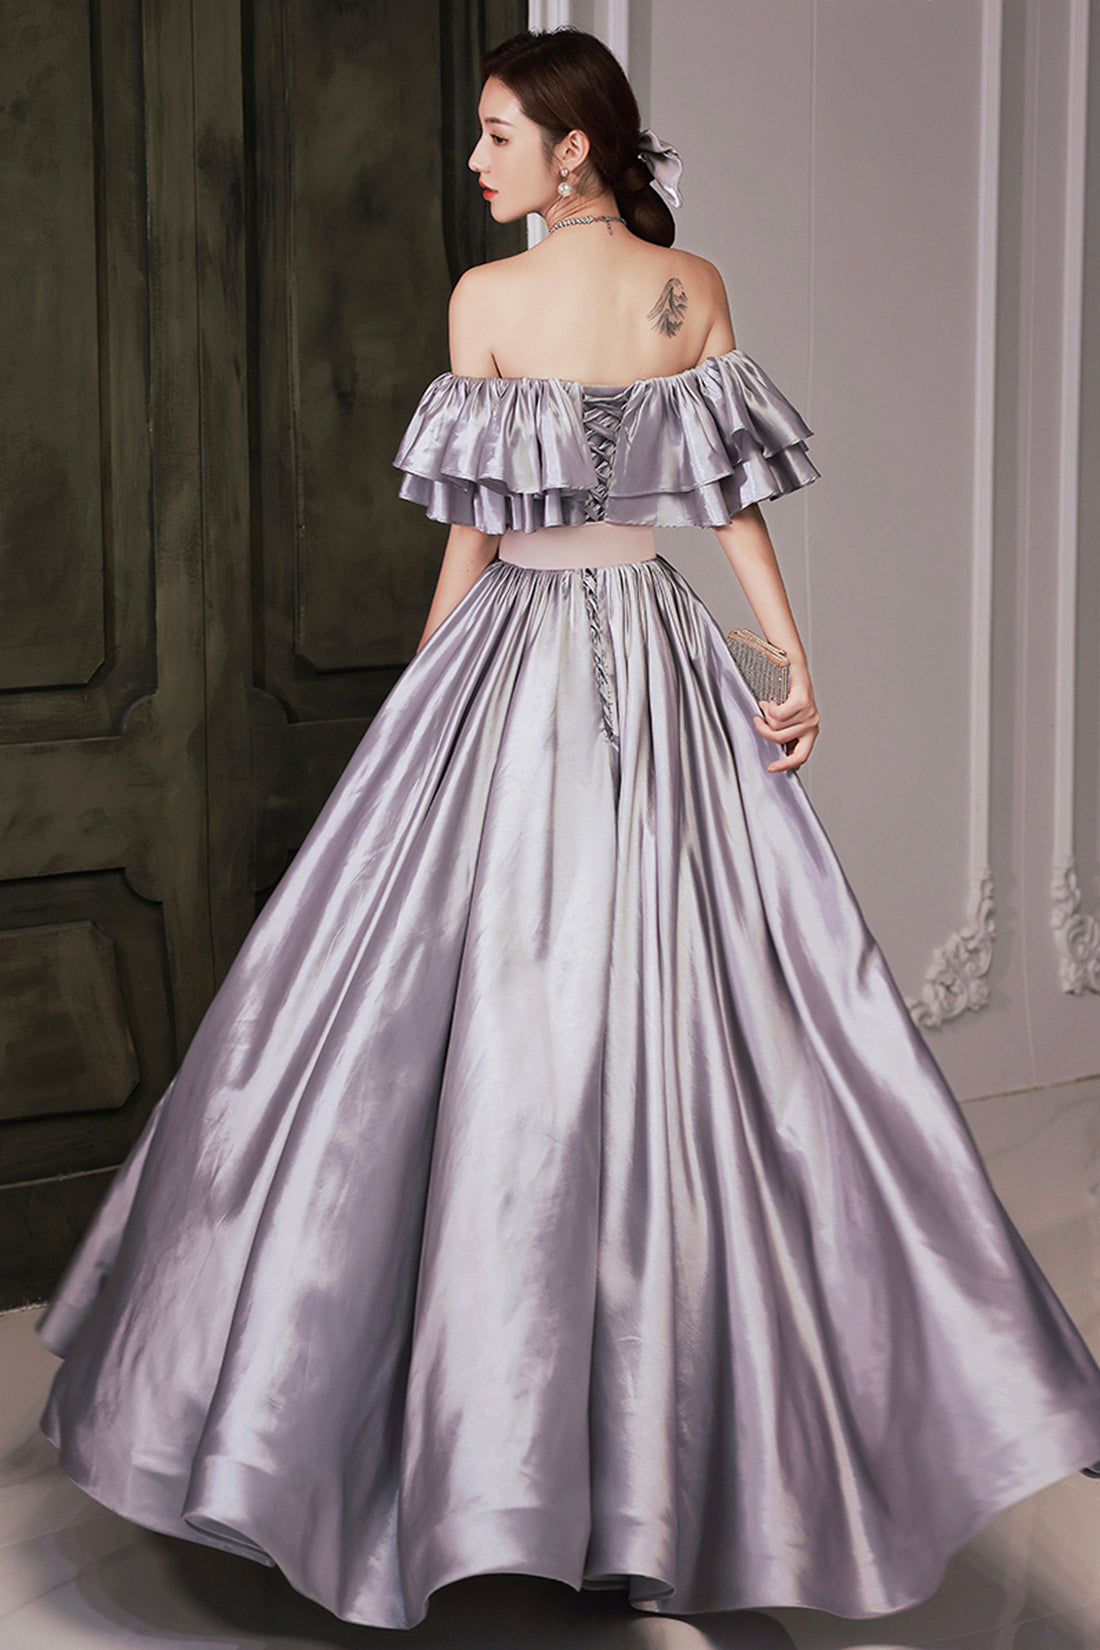 Lovely Satin Floor Length Prom Dress, Off Shoulder Evening Dress with Bow